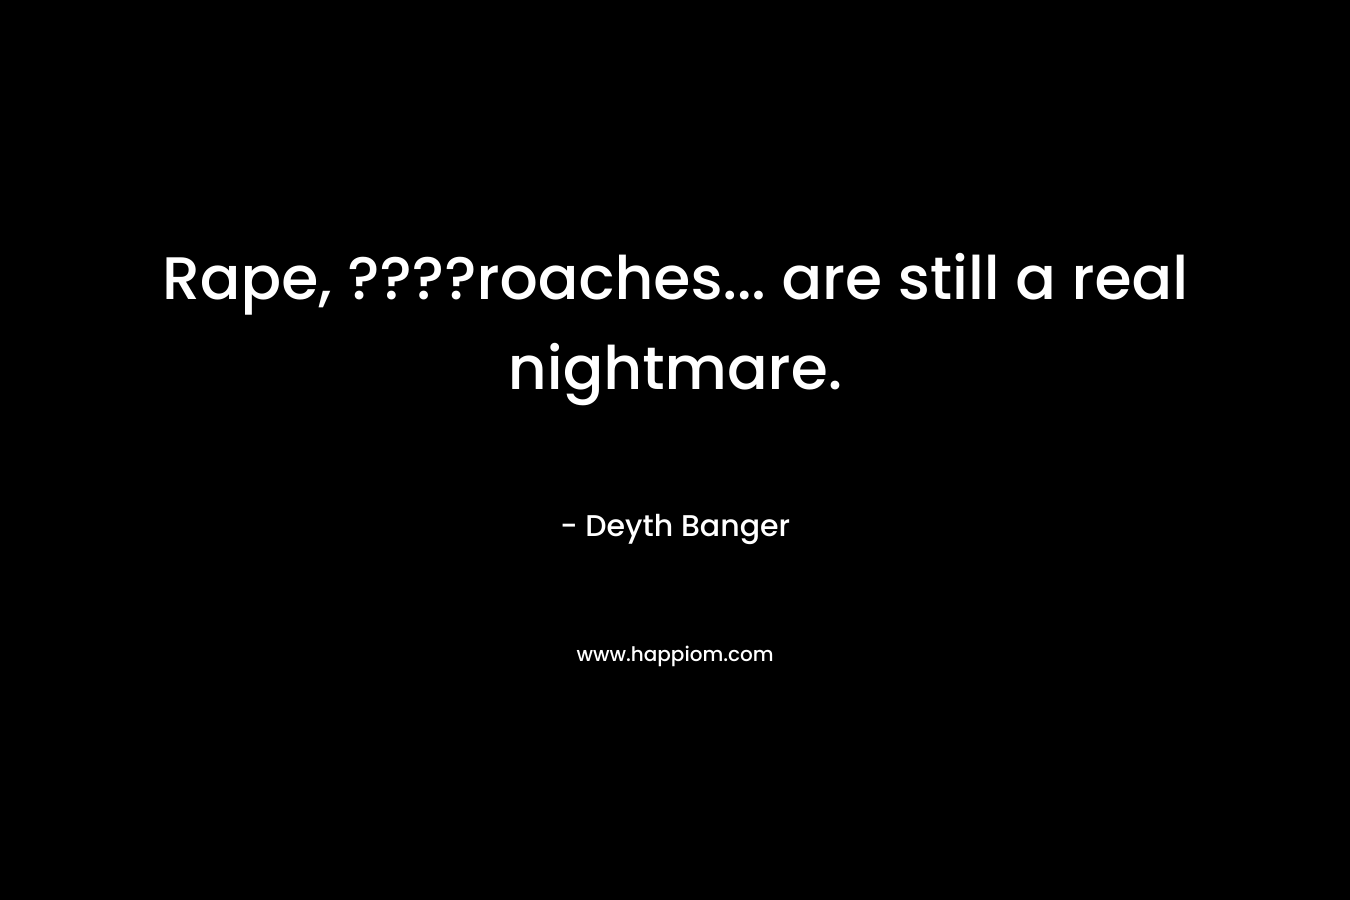 Rape, ????roaches… are still a real nightmare. – Deyth Banger